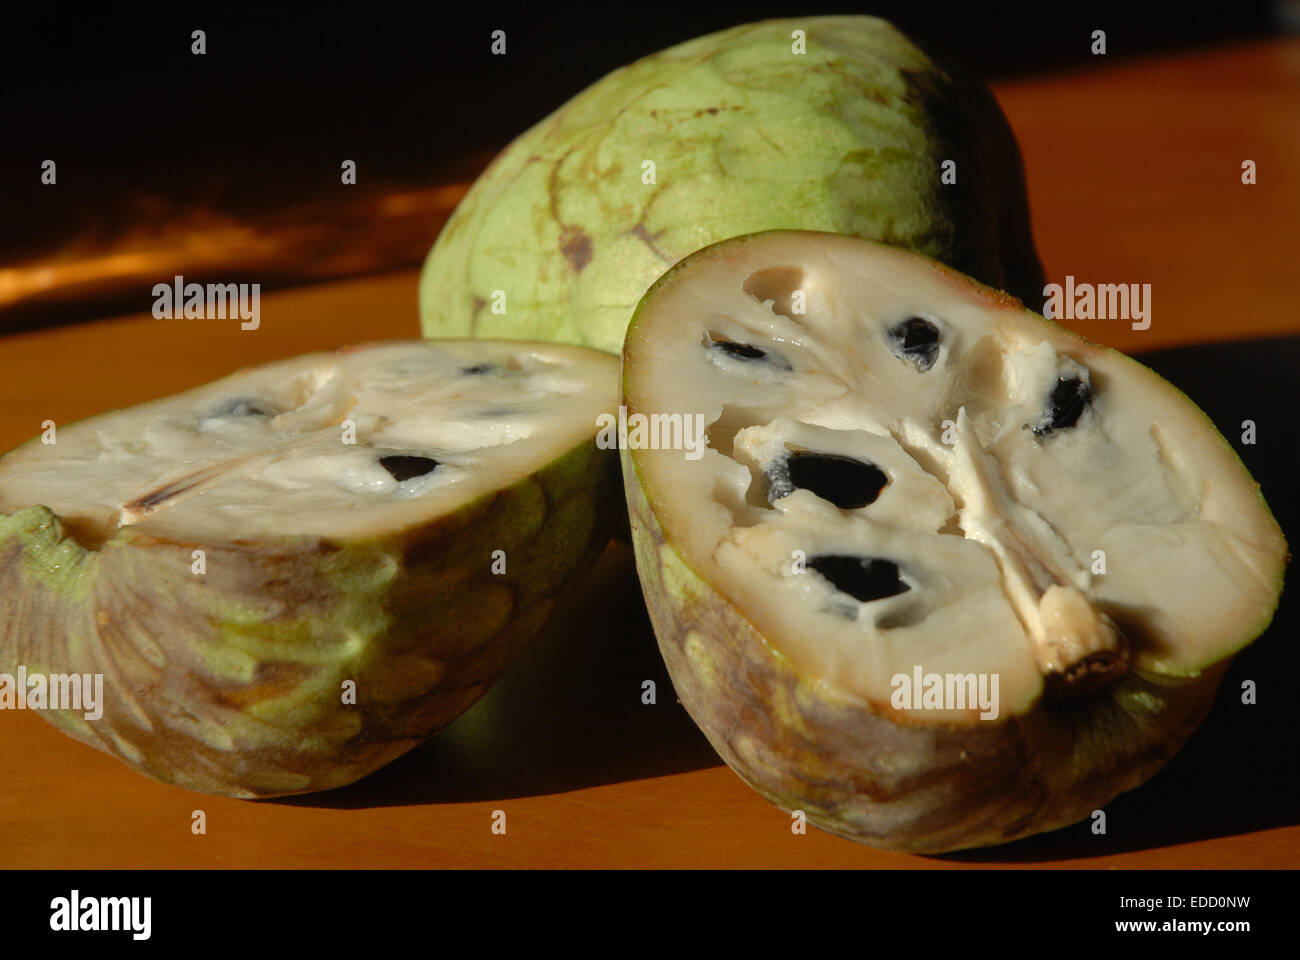 Cherimoya fruit, including one cut open showing the inside. Stock Photo